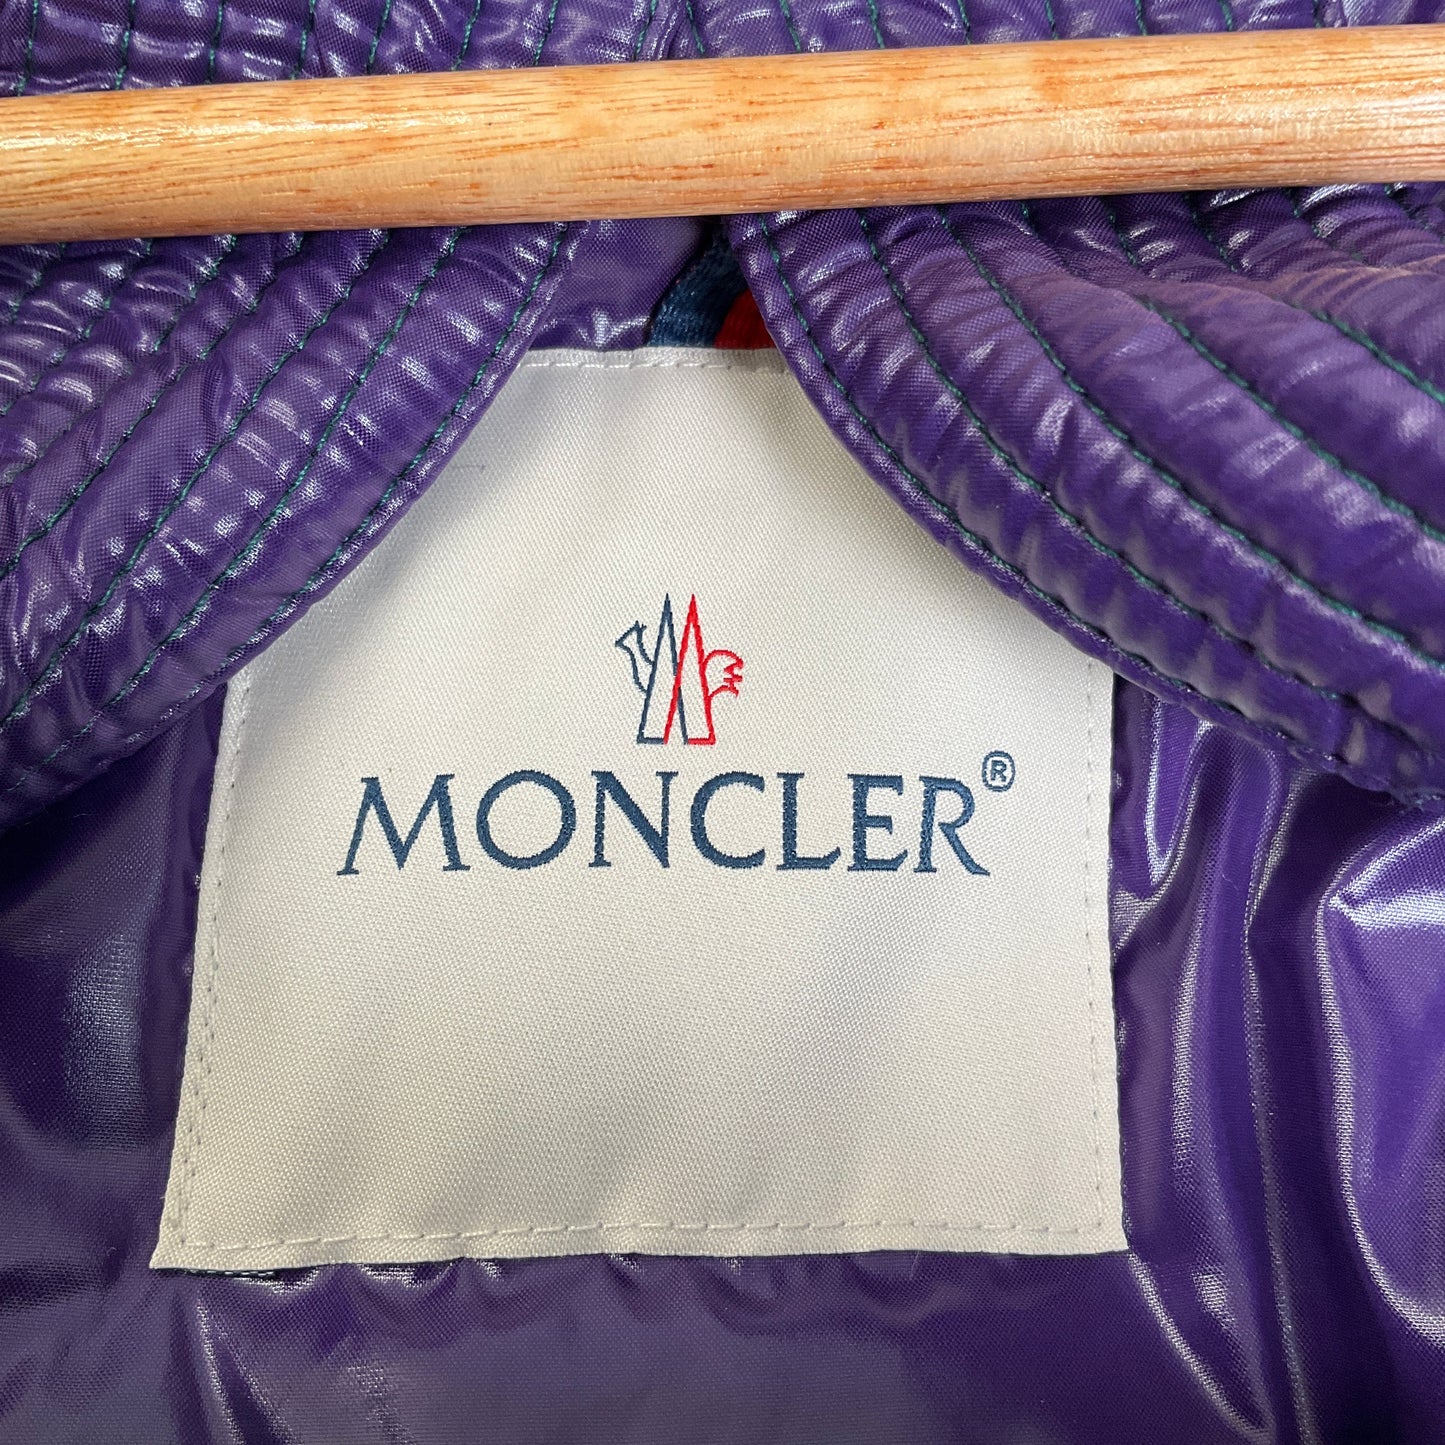 Moncler - Classic Puffer Jacket